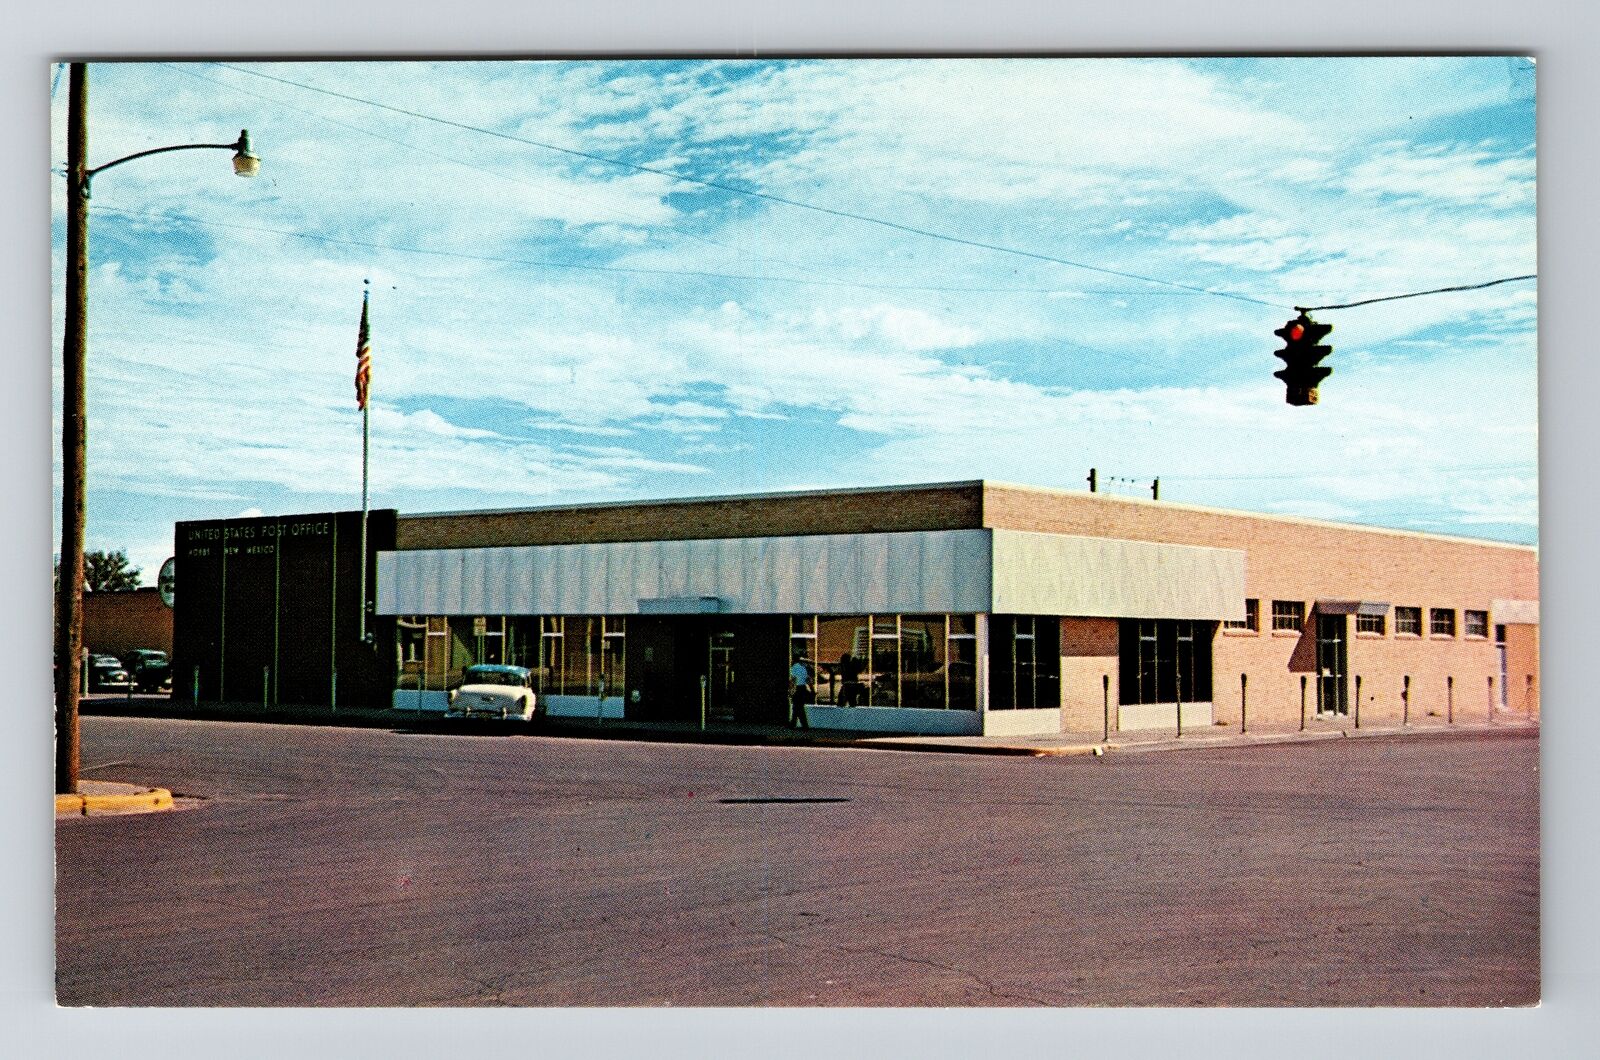 Hobbs NM-New Mexico, United States Post Office, Vintage Postcard